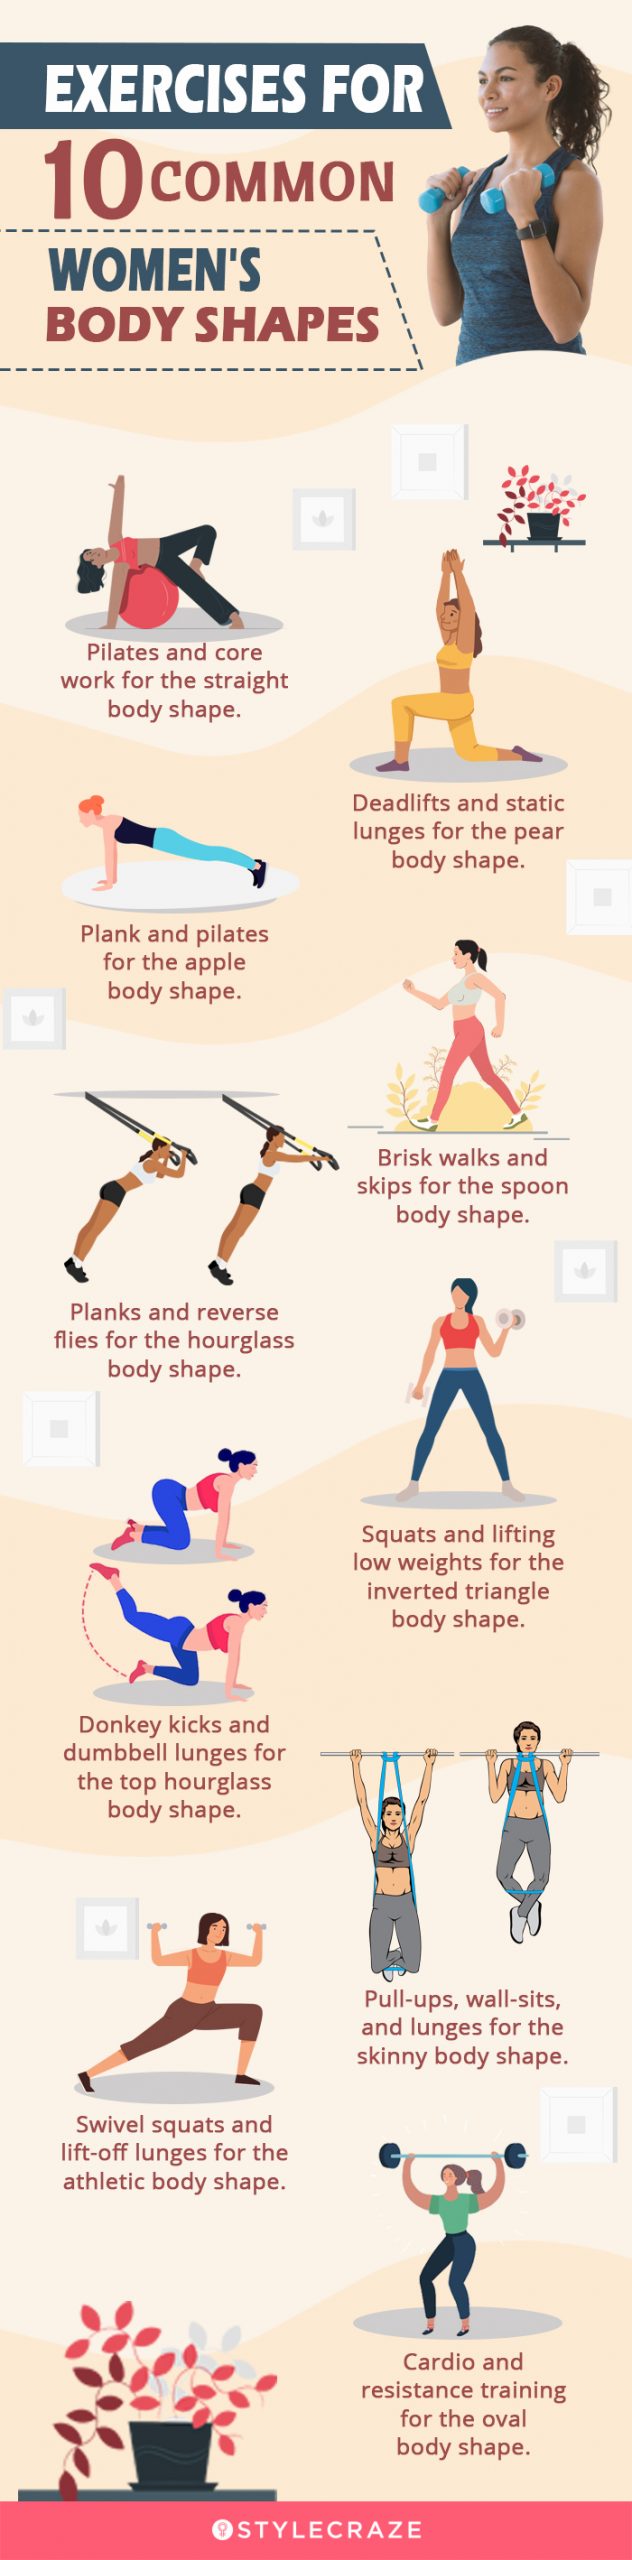 exercises for 10 common women's body shapes (infographic)